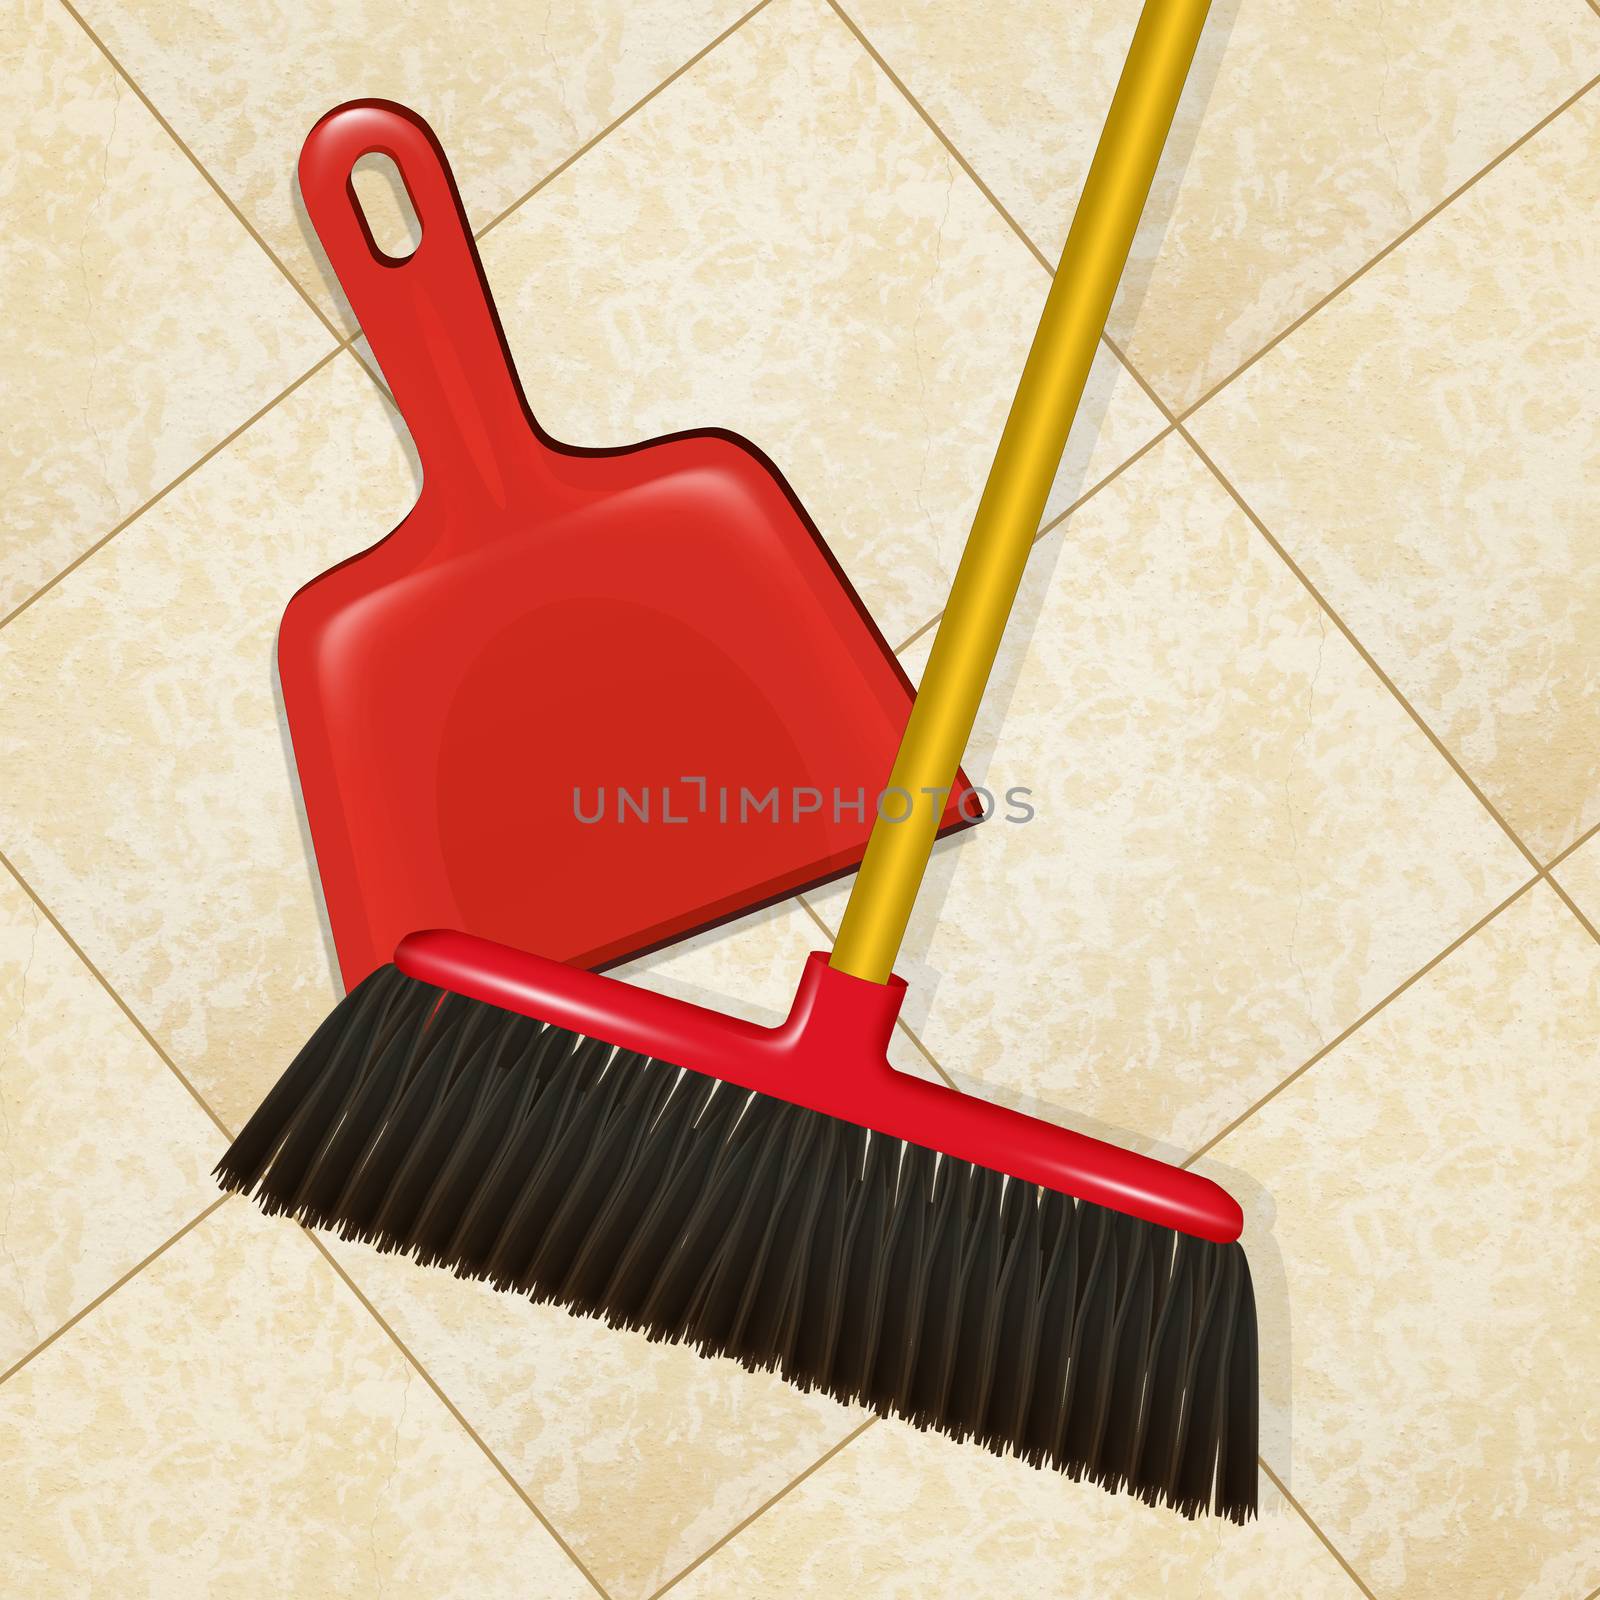 broom with dustpan on the floor by adrenalina